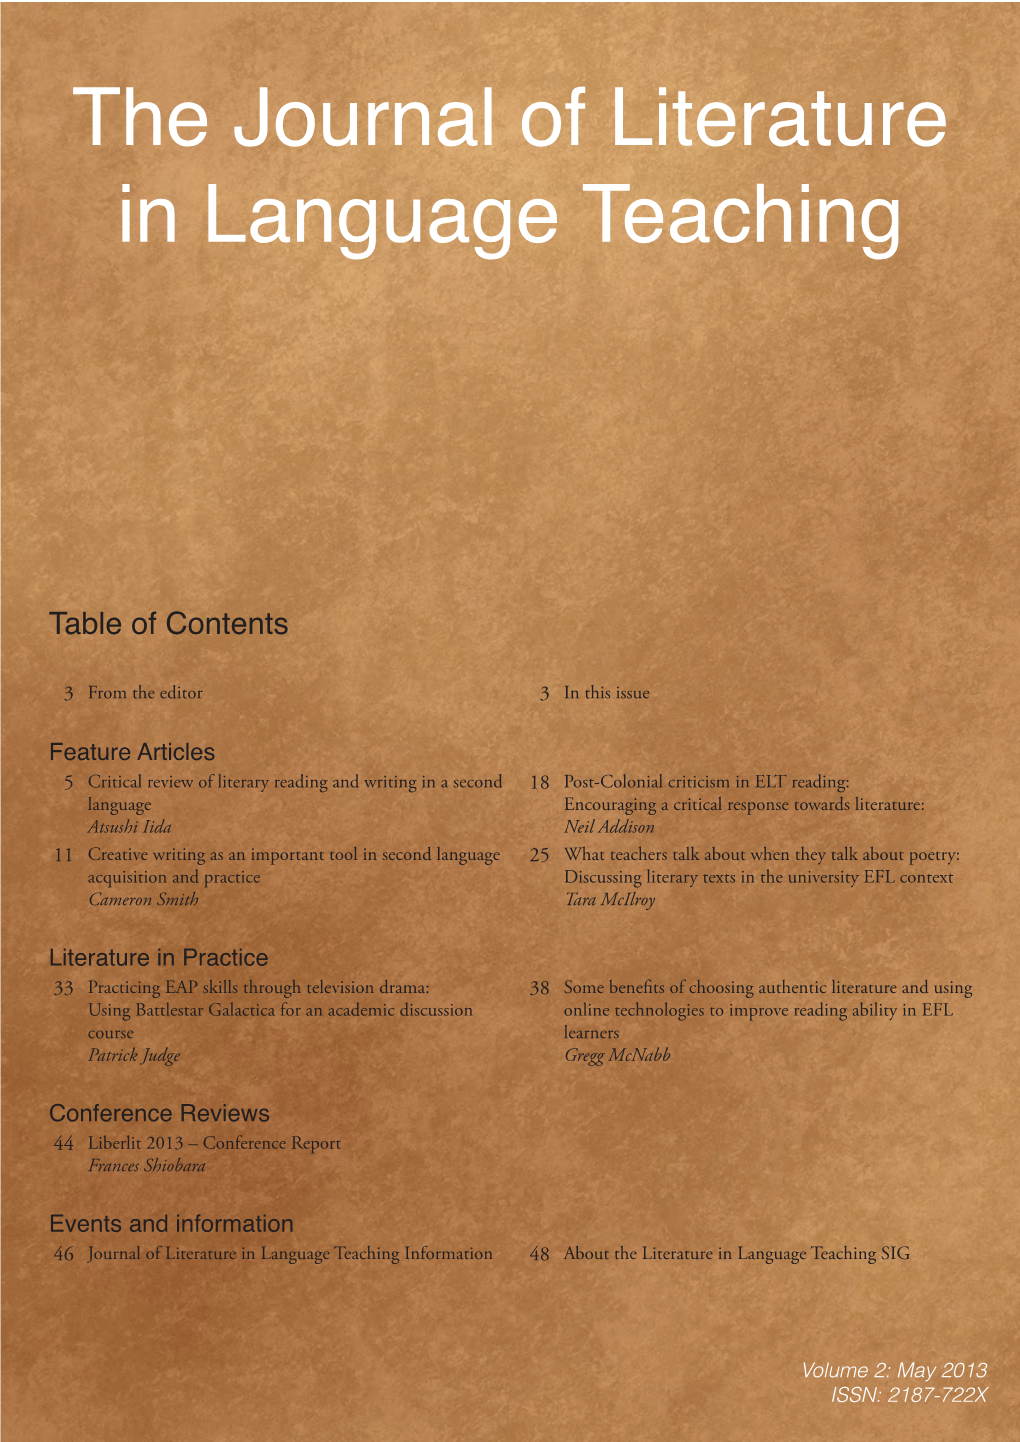 The Journal of Literature in Language Teaching